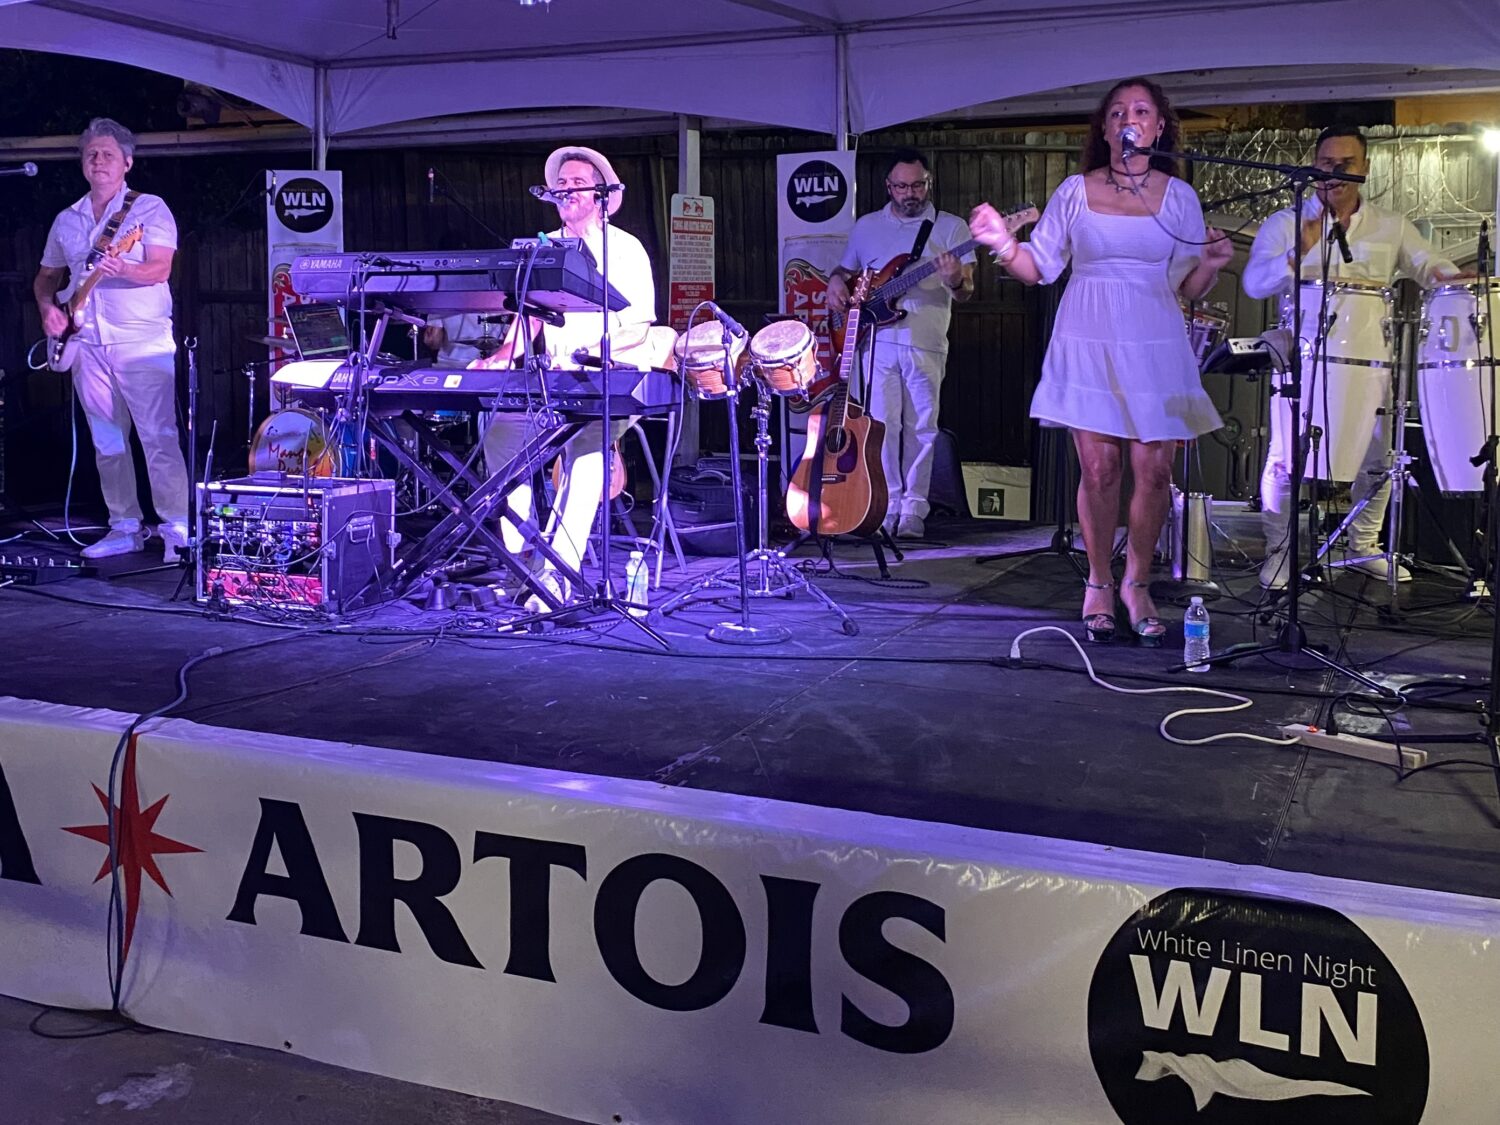 2nd Friday Art Night After Hours Brings Free Live Music, Local Art Market  to Capitol Plaza